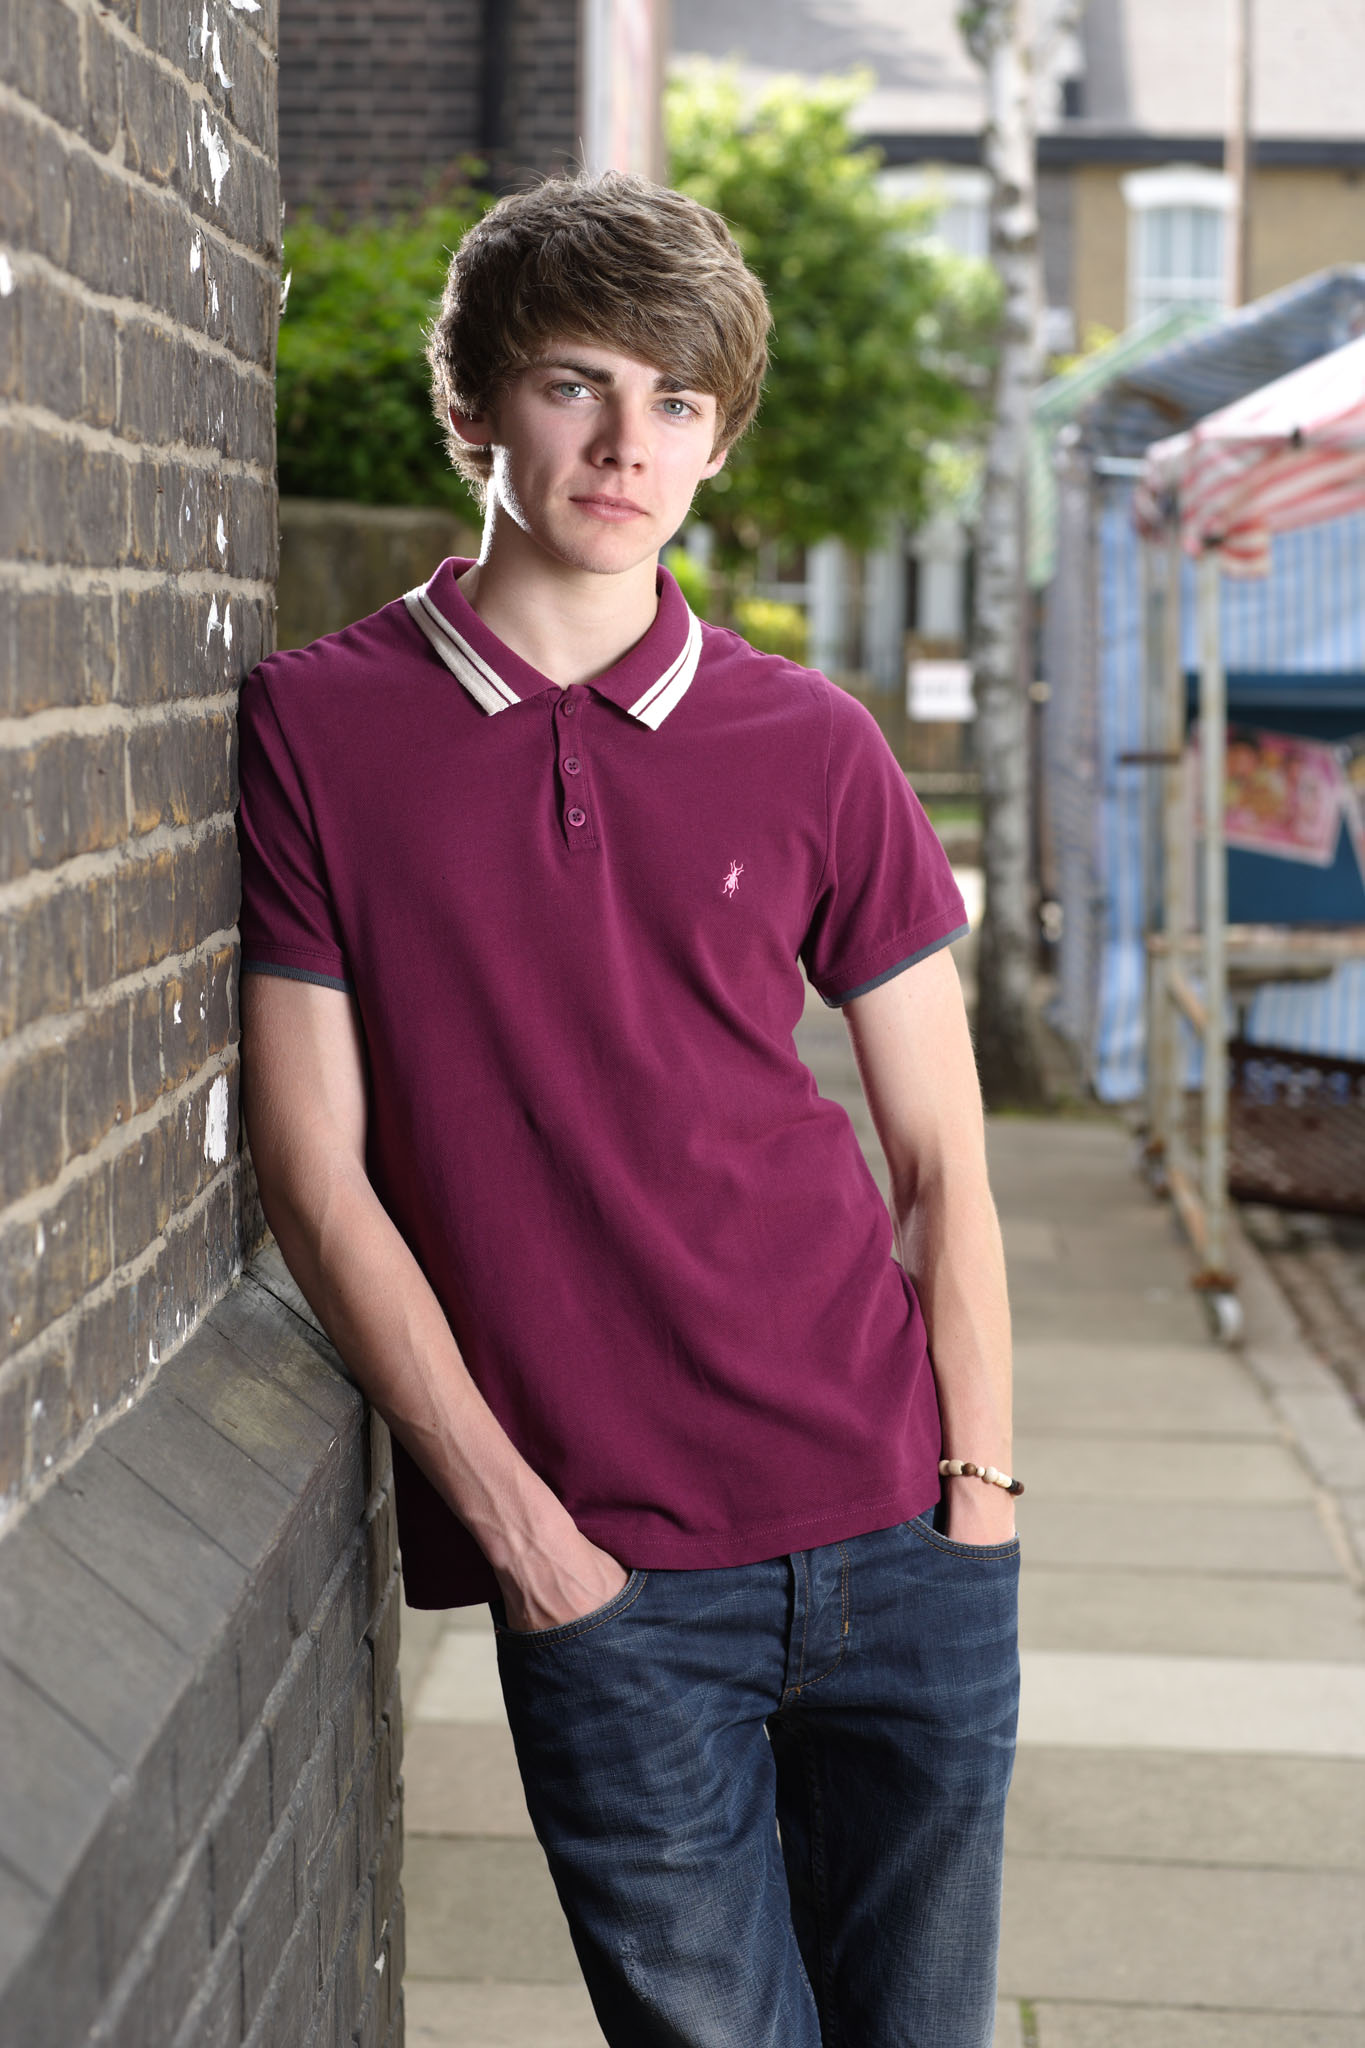 Ian and Cindy Beale's son Peter will also be returning